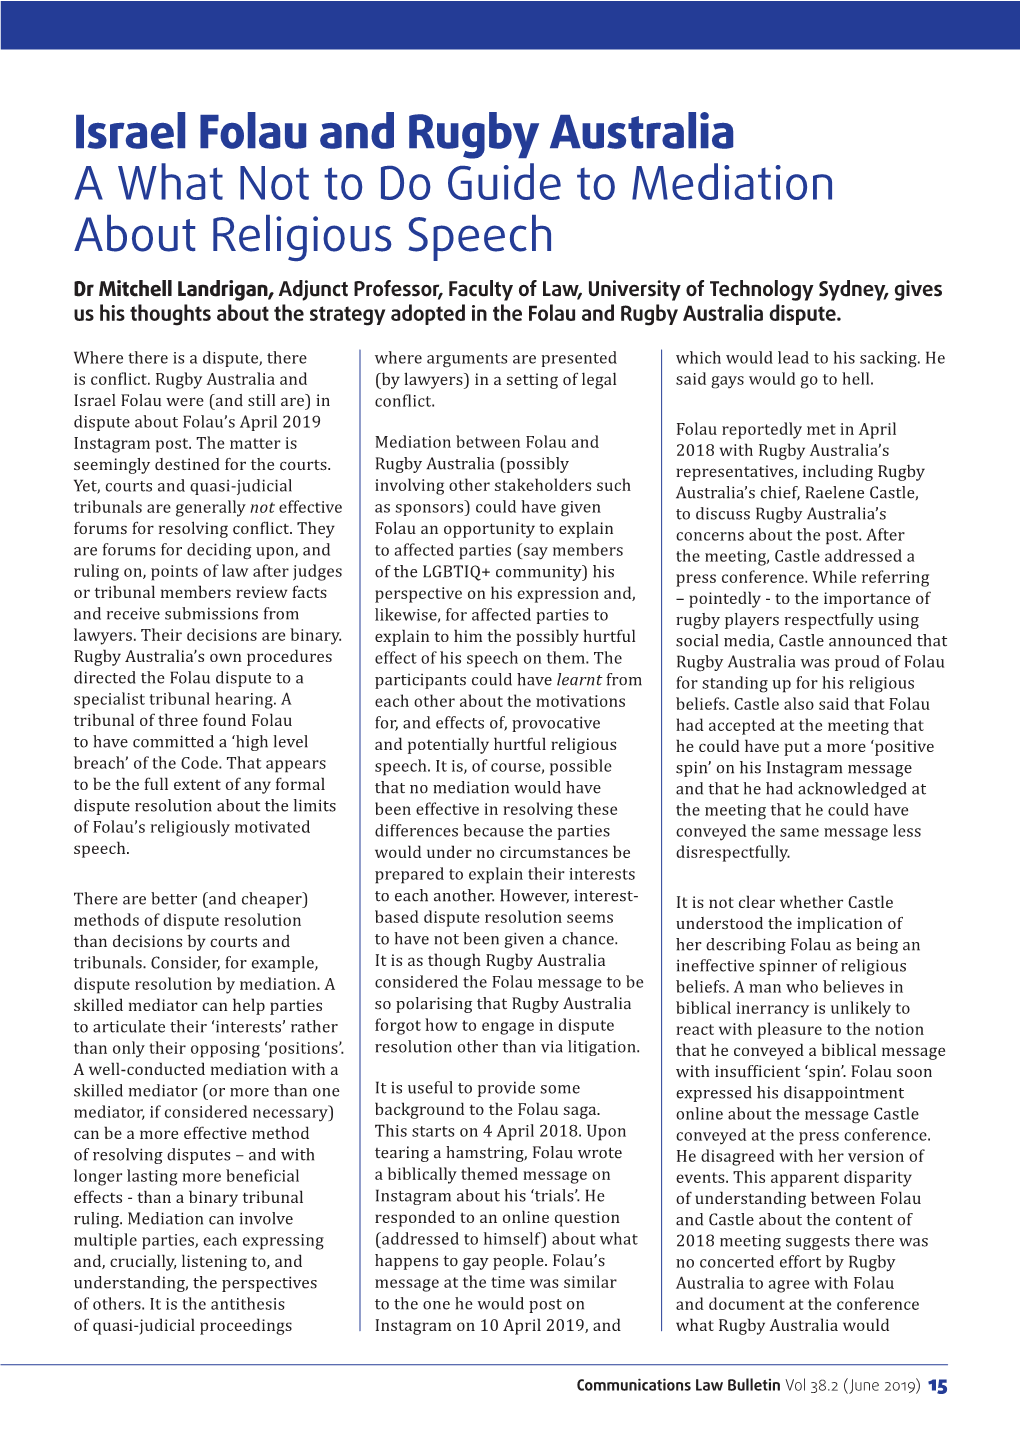 Israel Folau and Rugby Australia a What Not to Do Guide to Mediation About Religious Speech